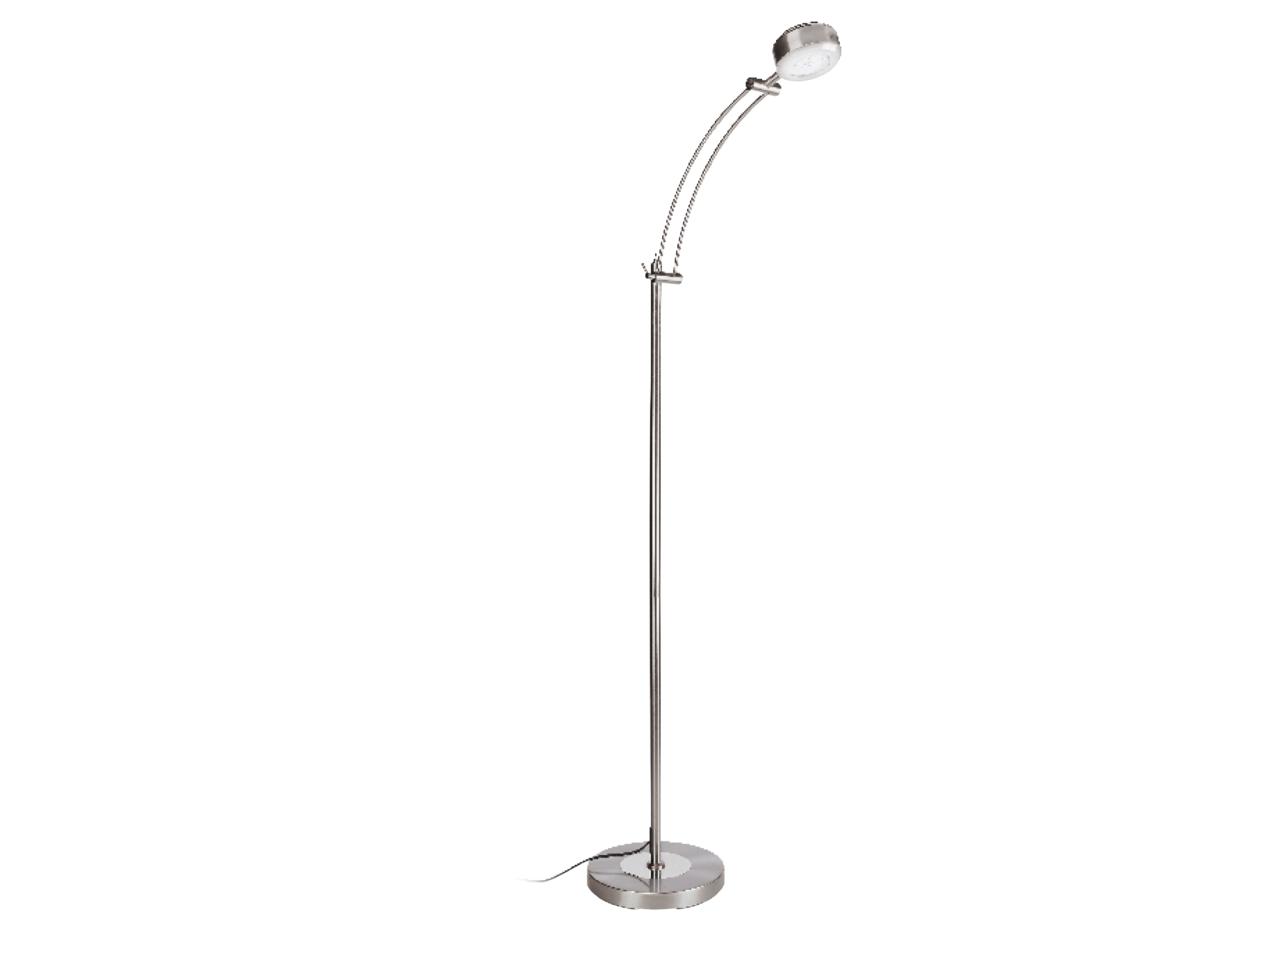 LIVARNO LUX(R) LED Standing Lamp